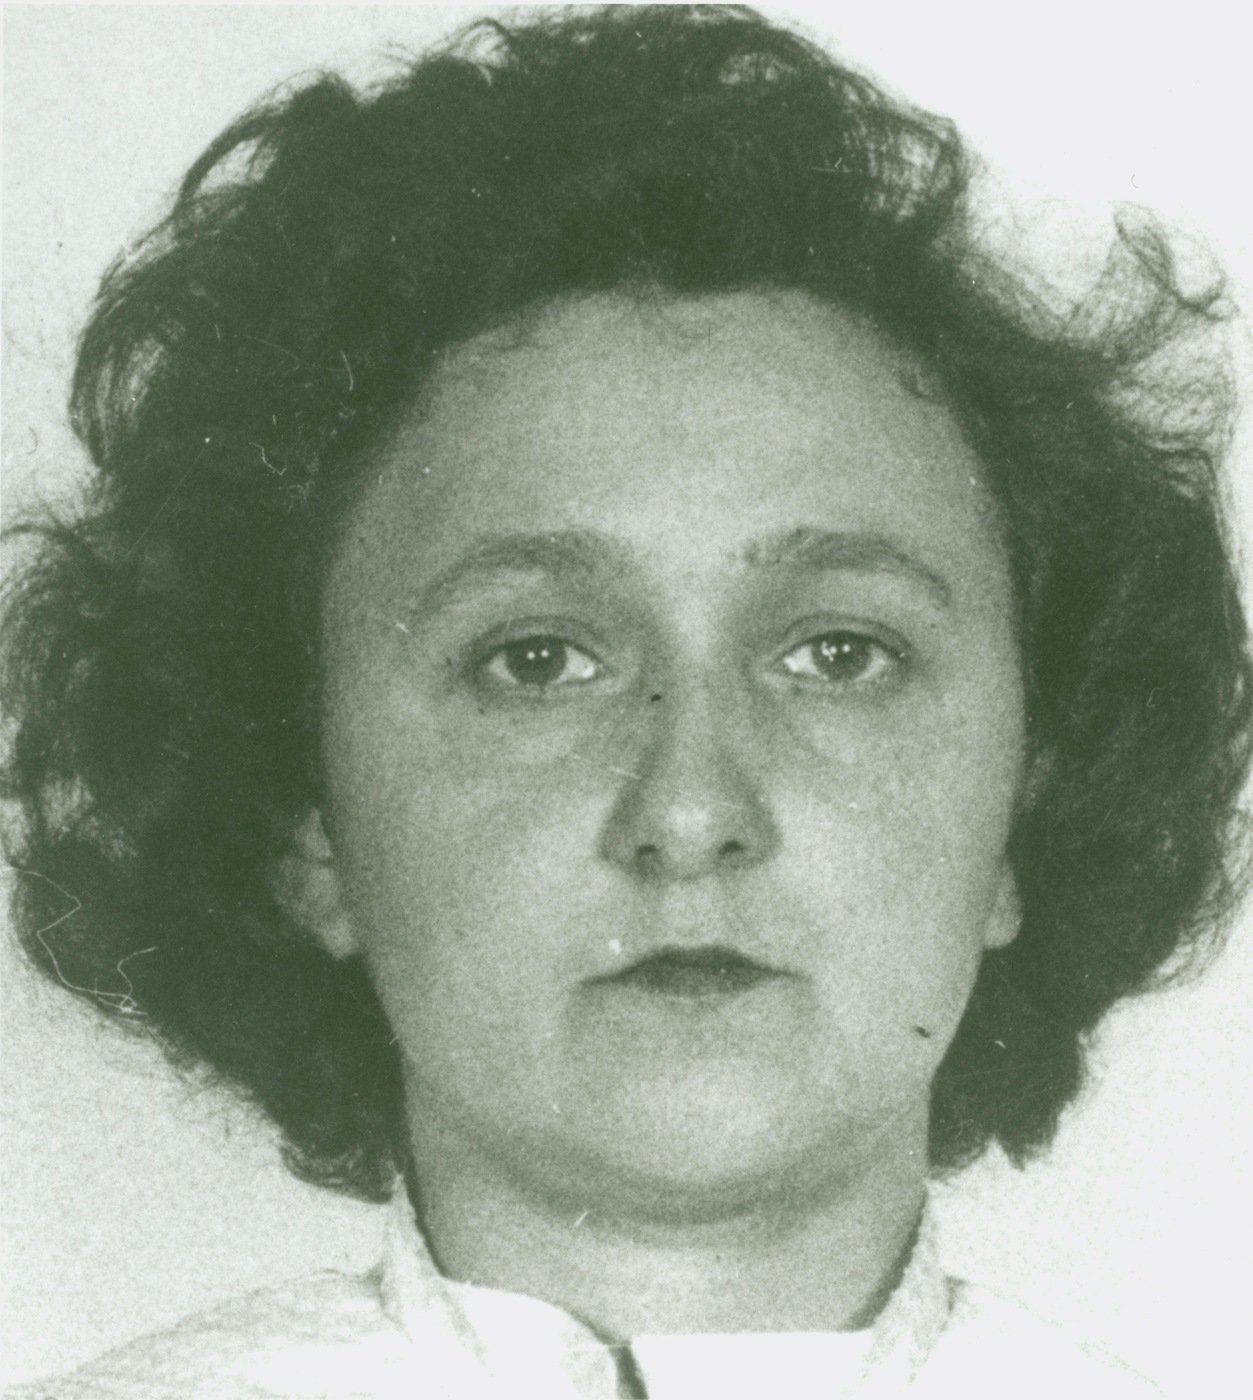 Ethel Greenglass Rosenberg, wife of and collaborator with spy Julius Rosenberg, convicted of espionage in 1951 and executed on June 19, 1953.